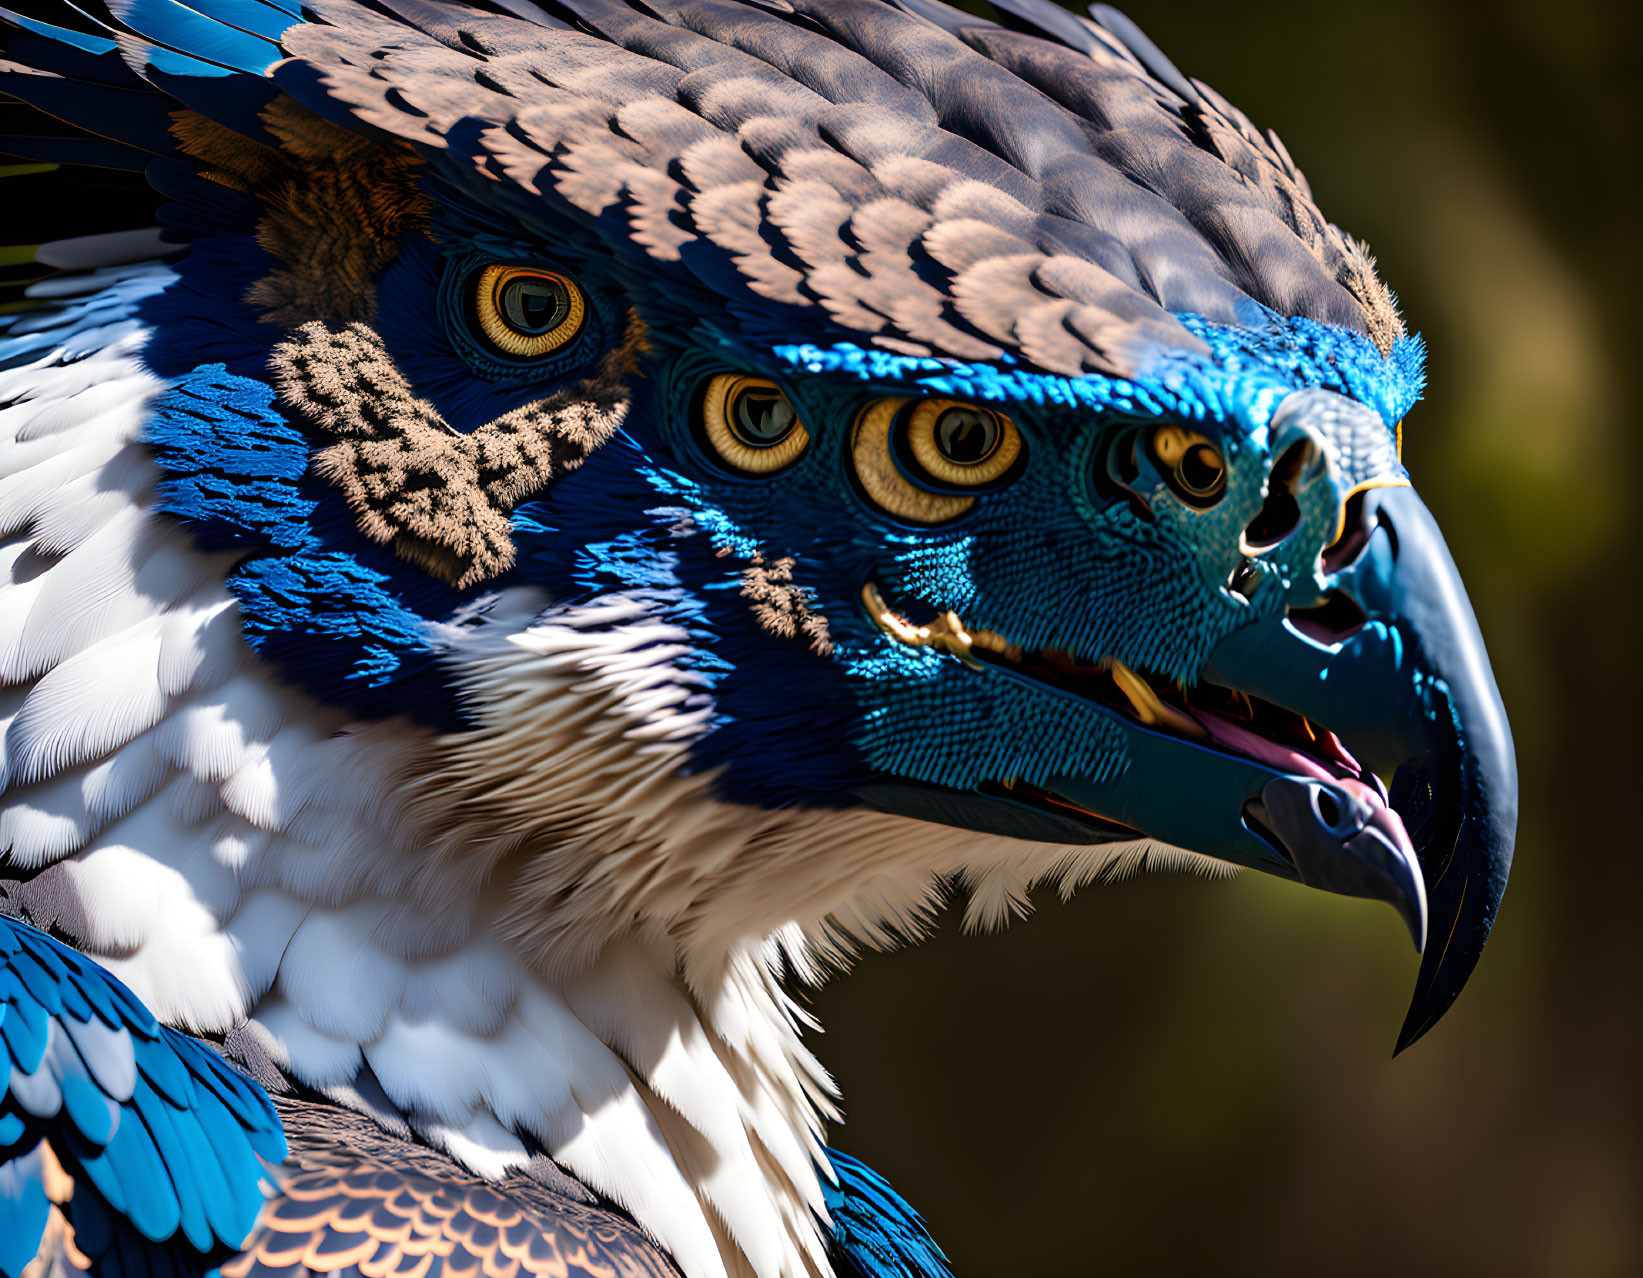 Stylized digital artwork of a blue and brown eagle with sharp beak